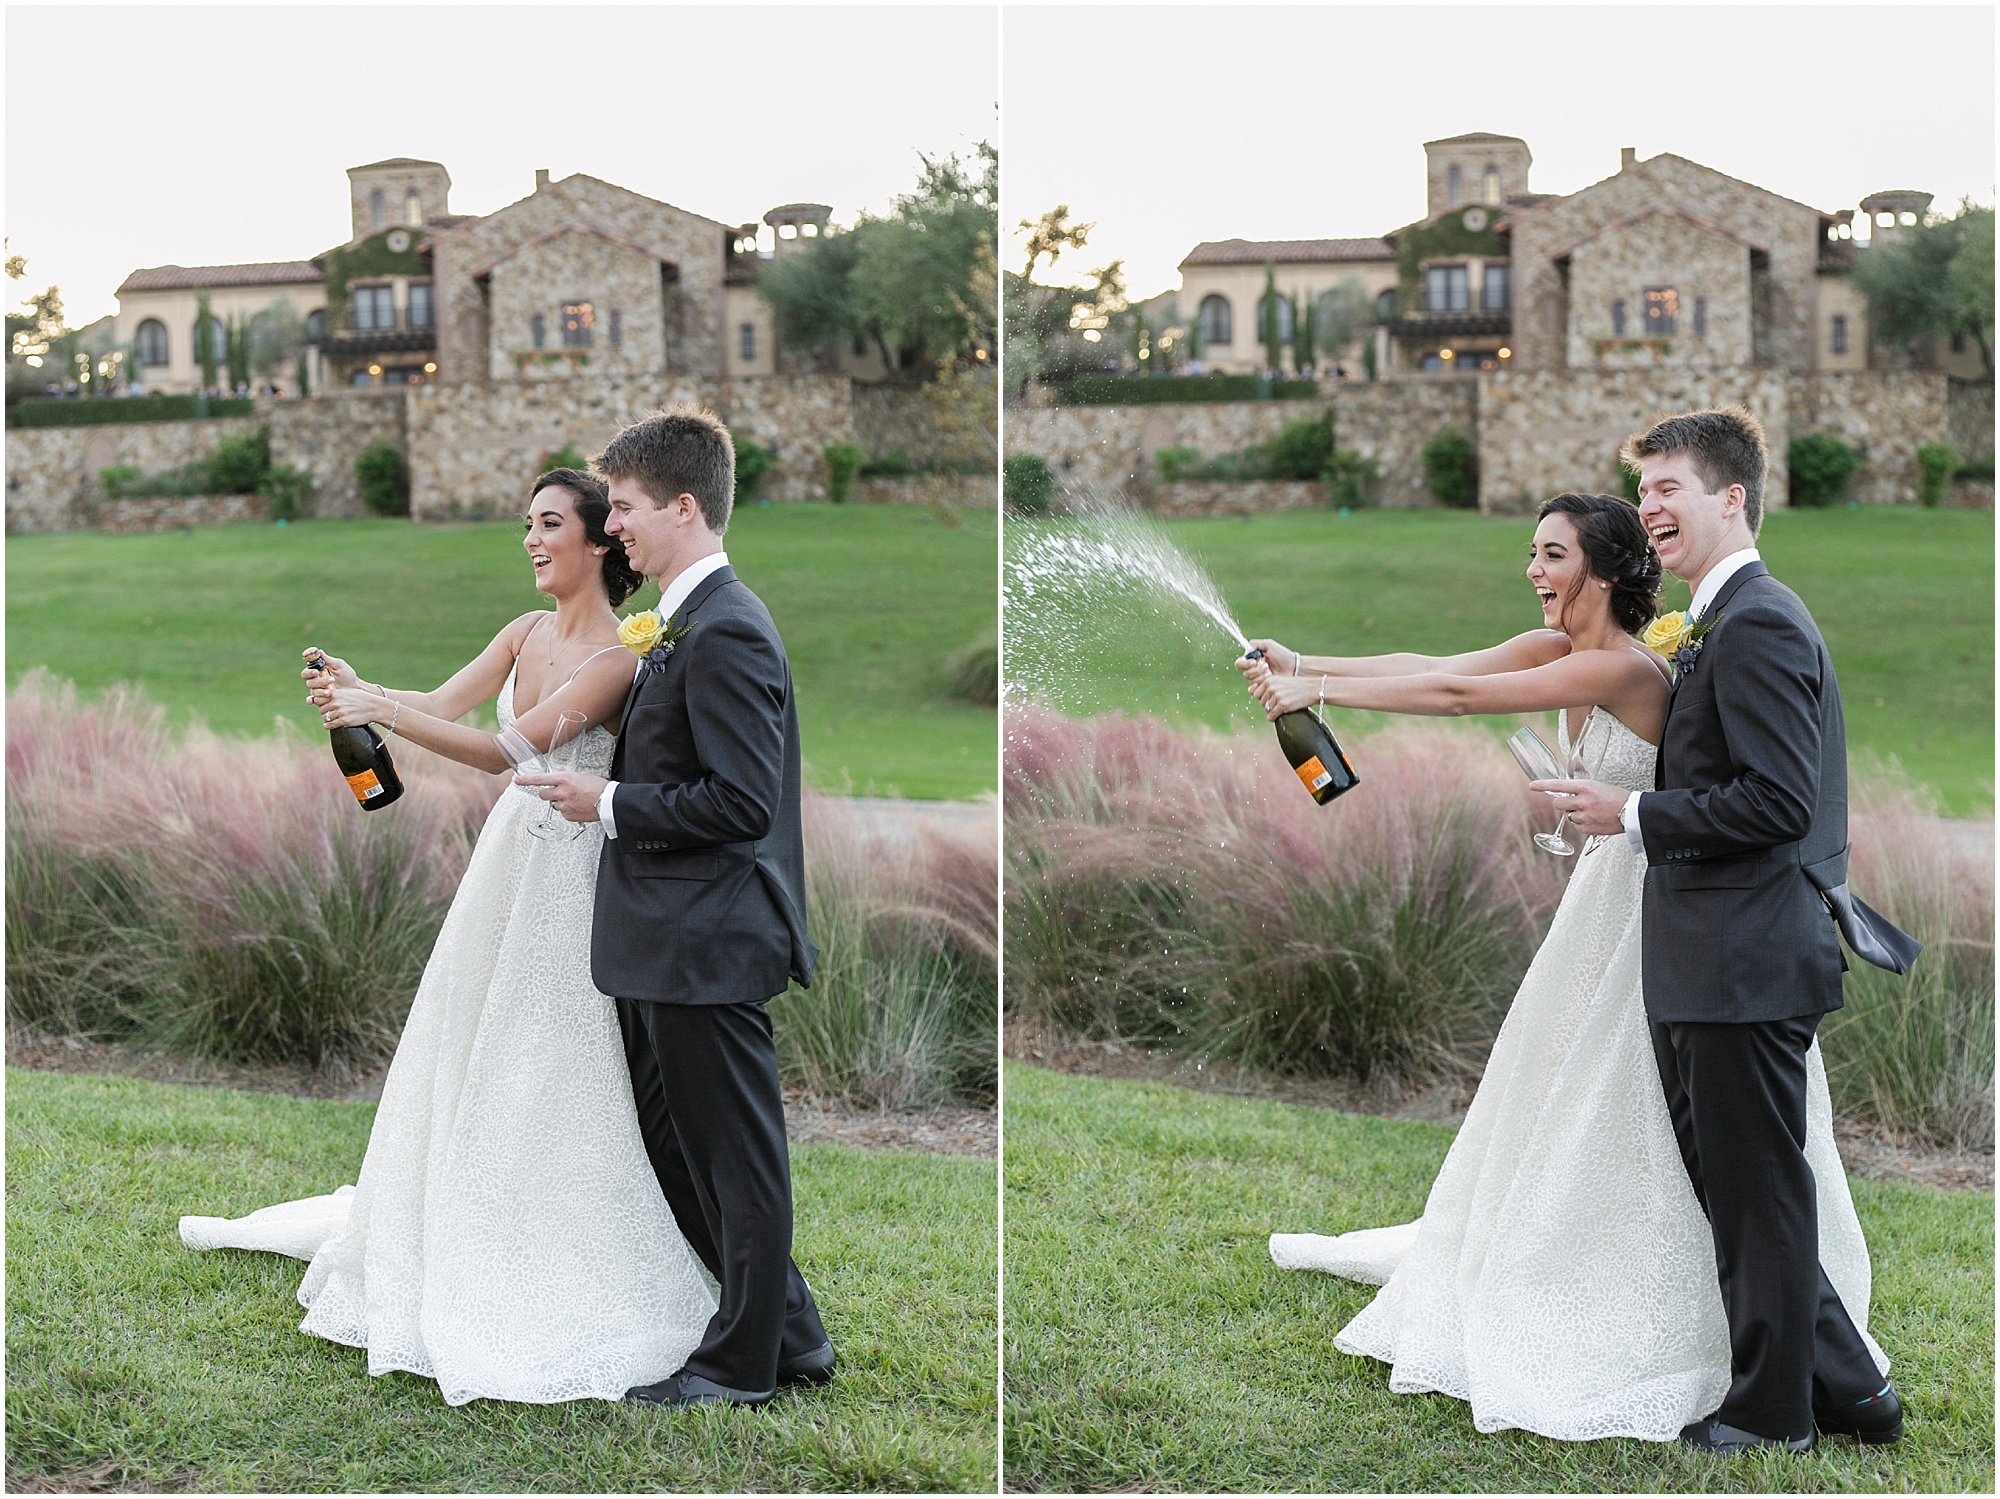 Bride and groom opening a bottle of champagne outside.